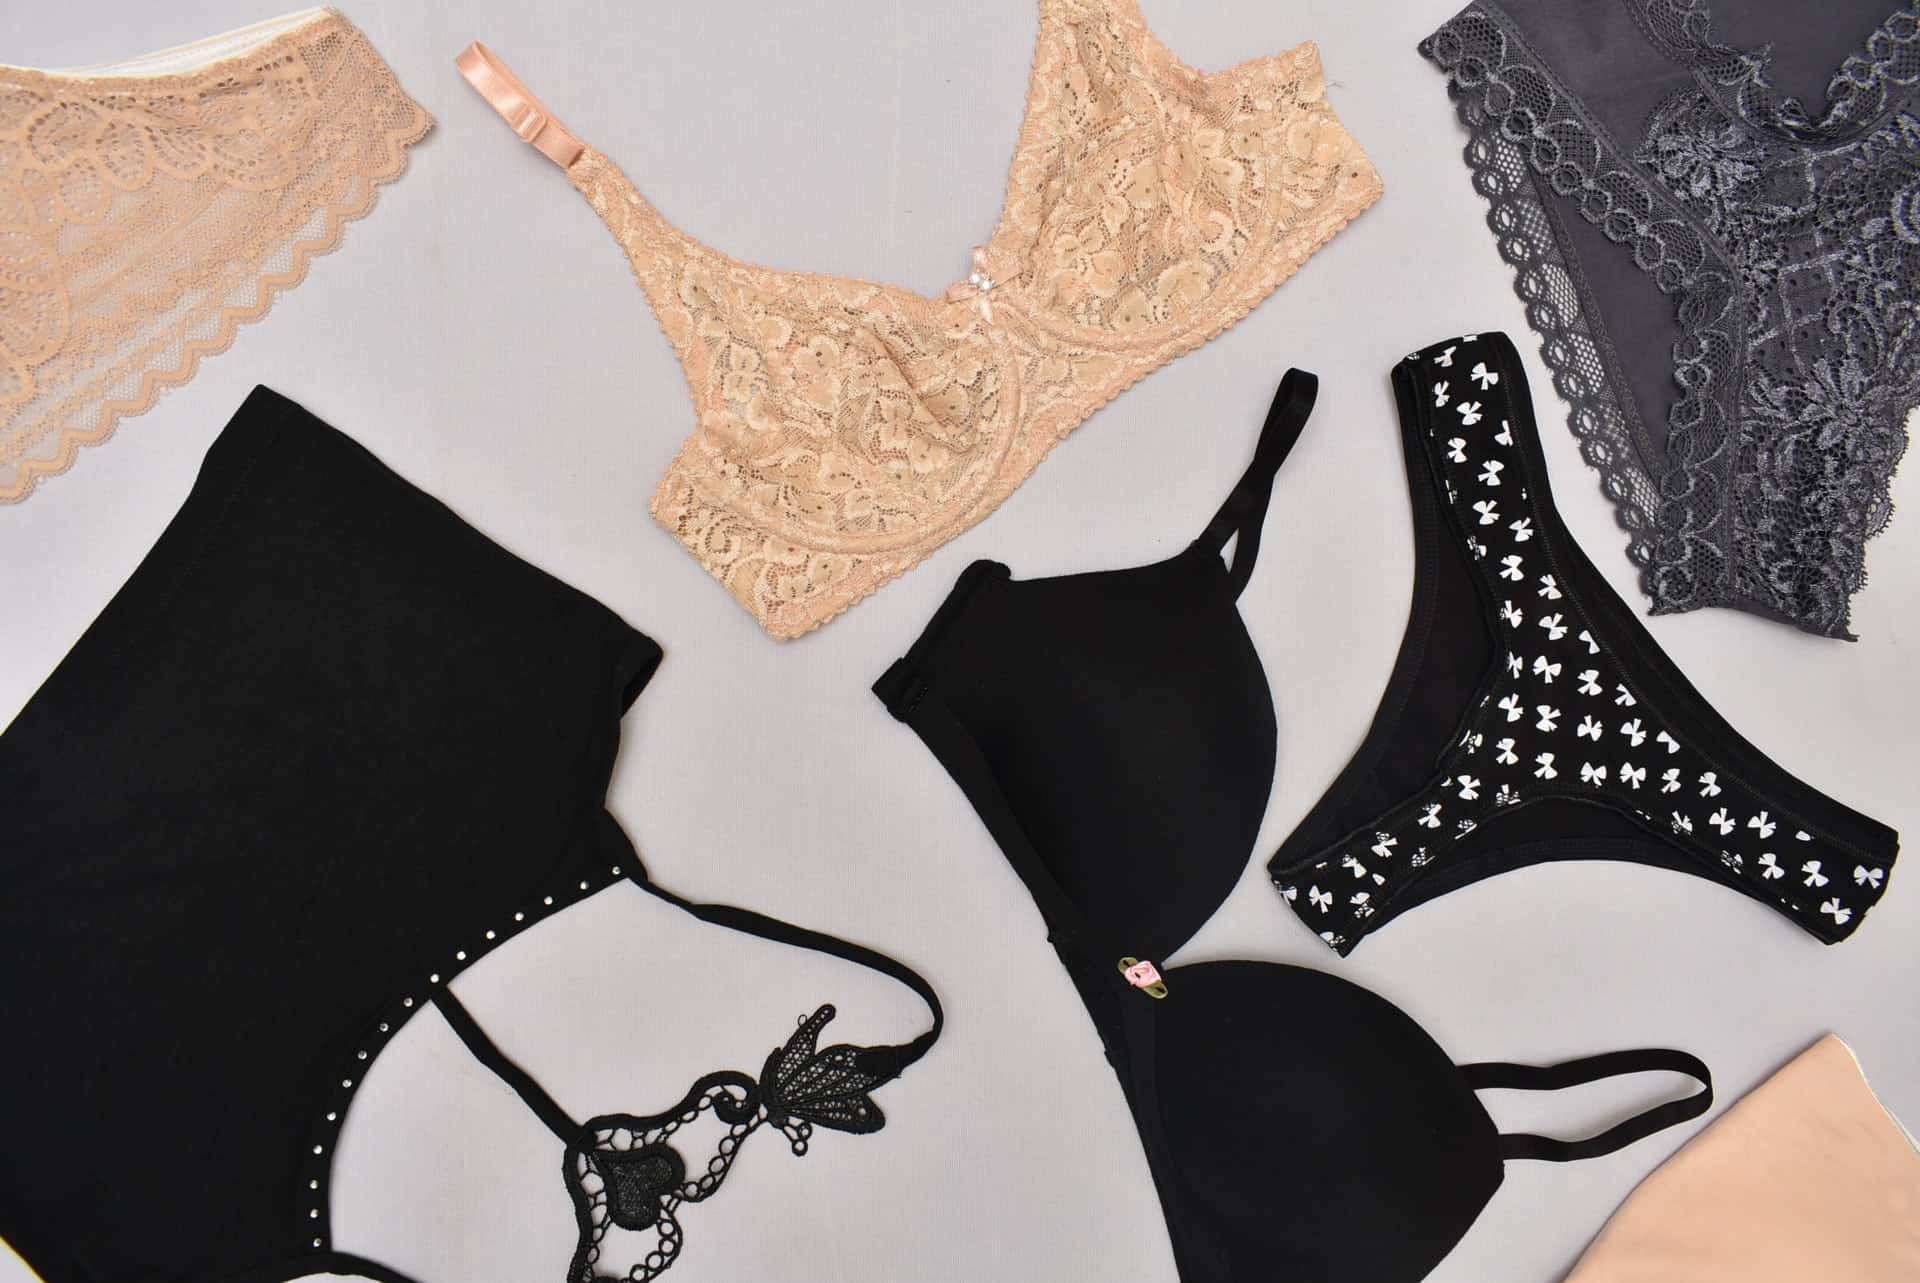 Types of Lingerie for Women: Babydolls, Bridal, and More